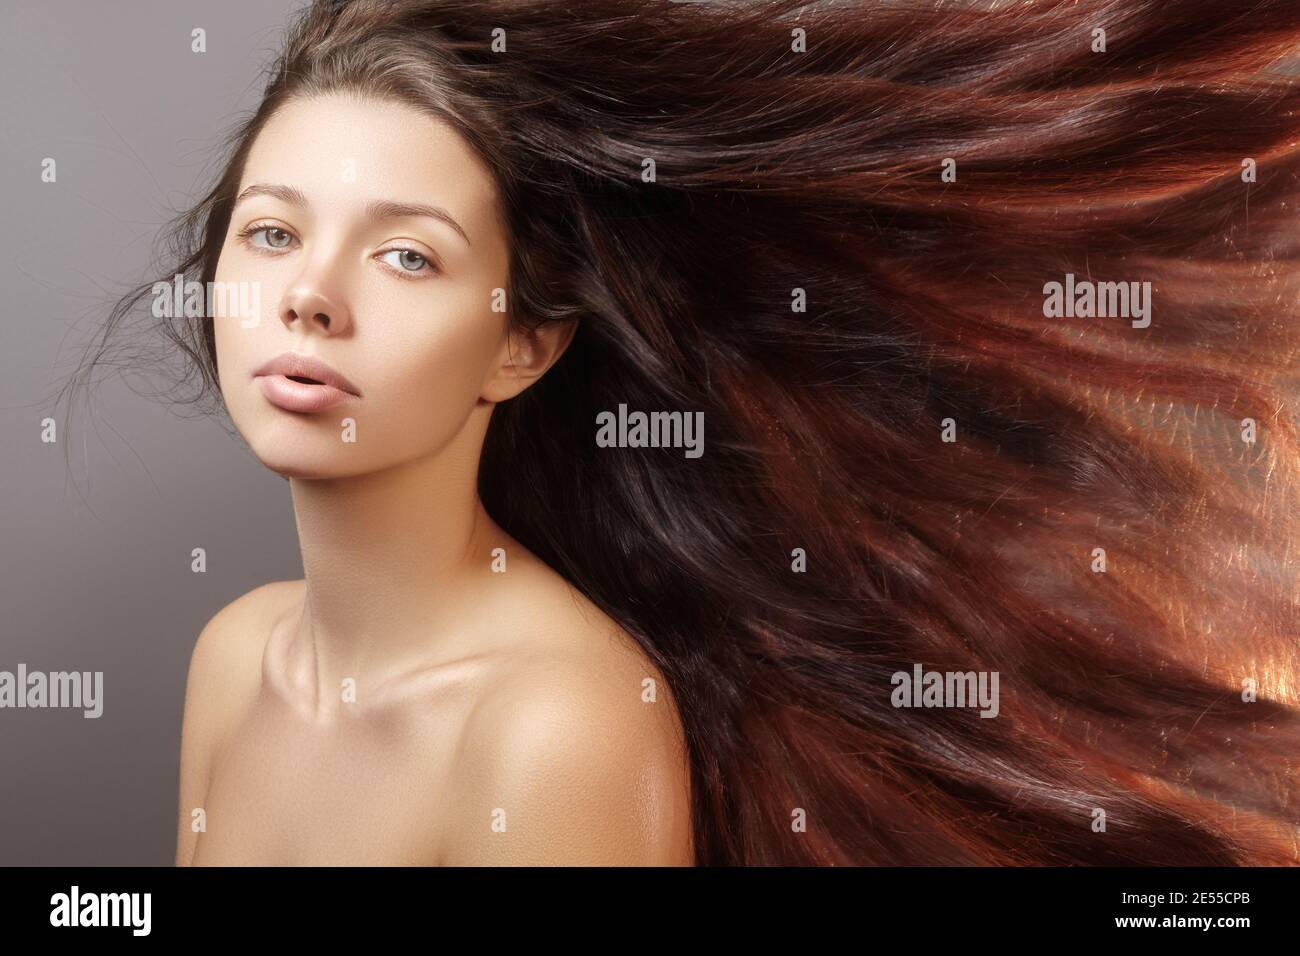 Brunette woman with hair fly up from the wind. Beautiful woman with clean skin and long brown hair. Close-up portrait on gray background Stock Photo